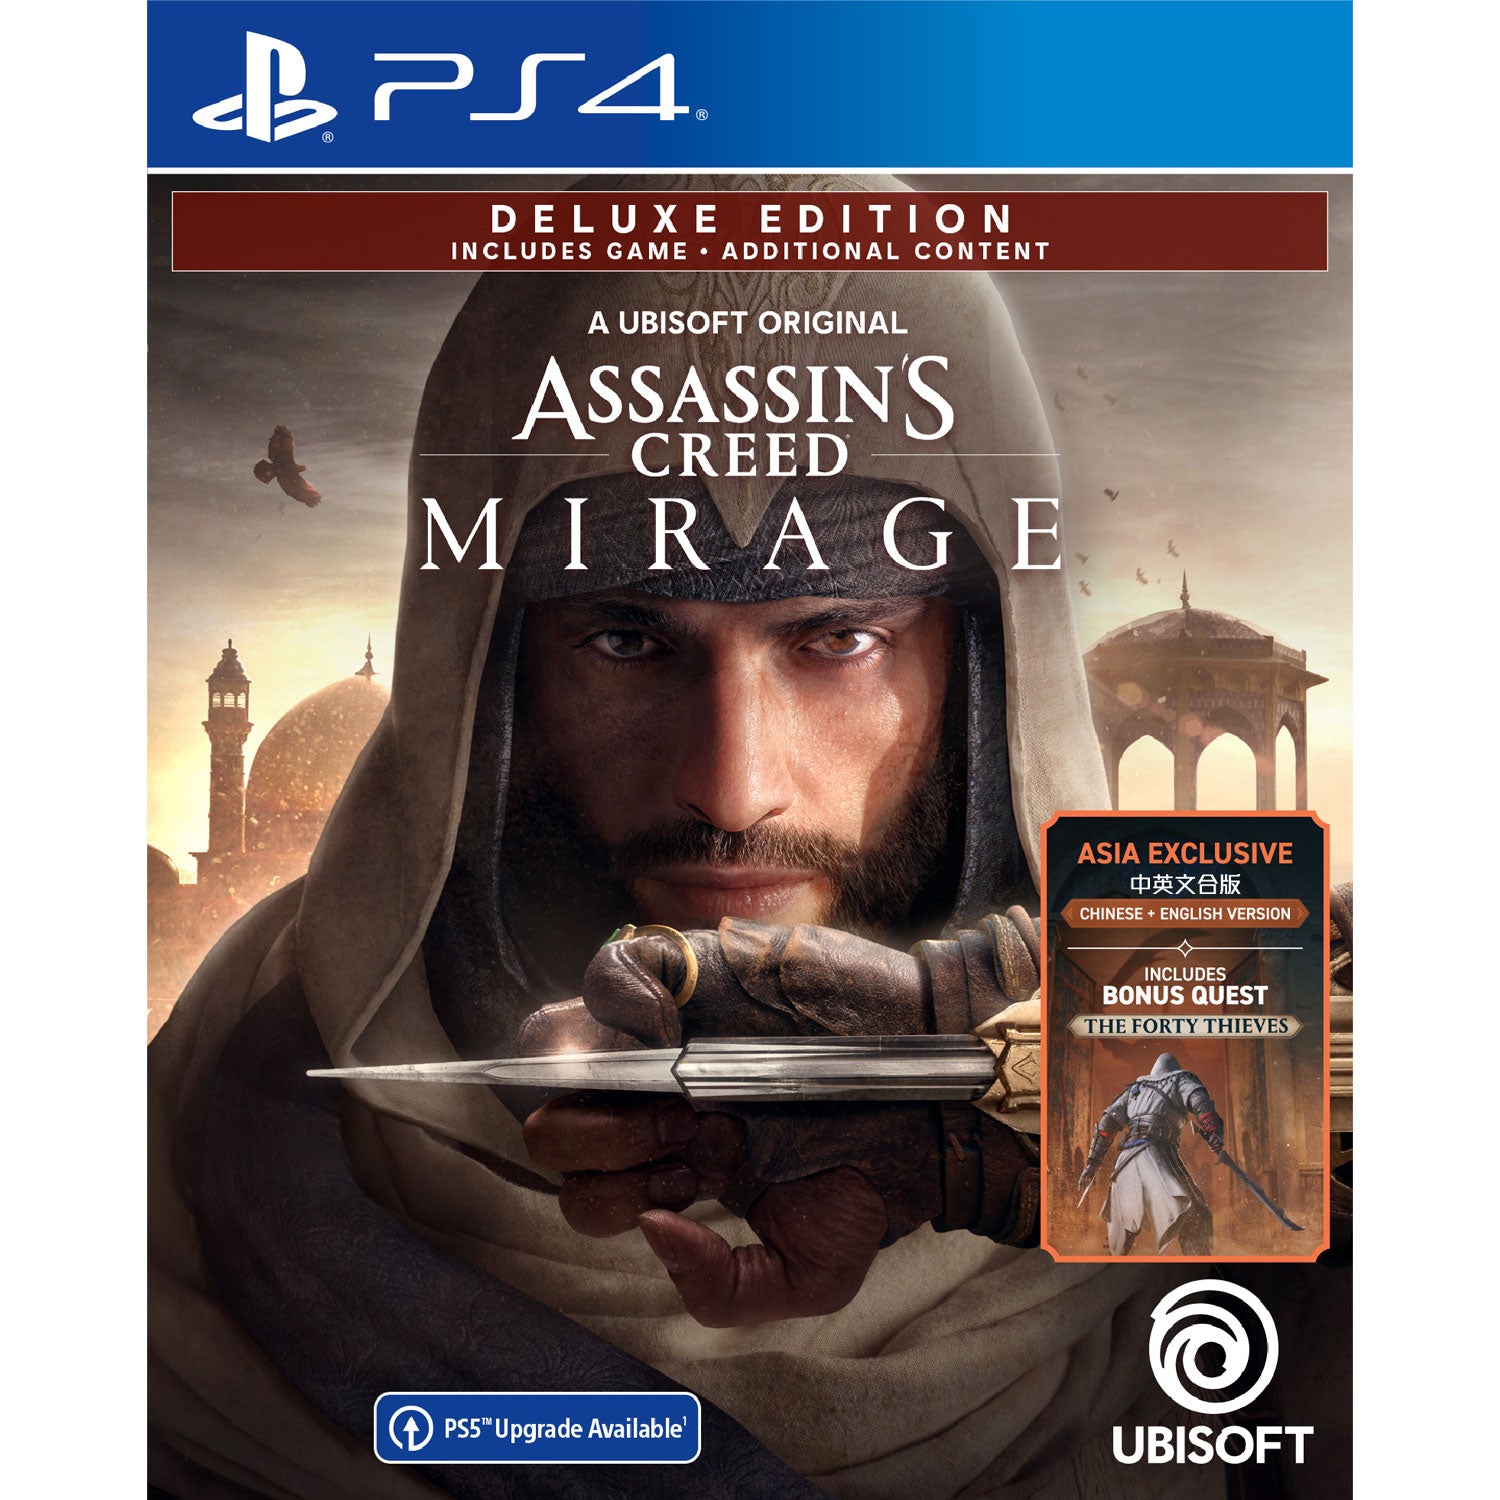 PS4 Assassin's Creed Mirage Deluxe Edition -